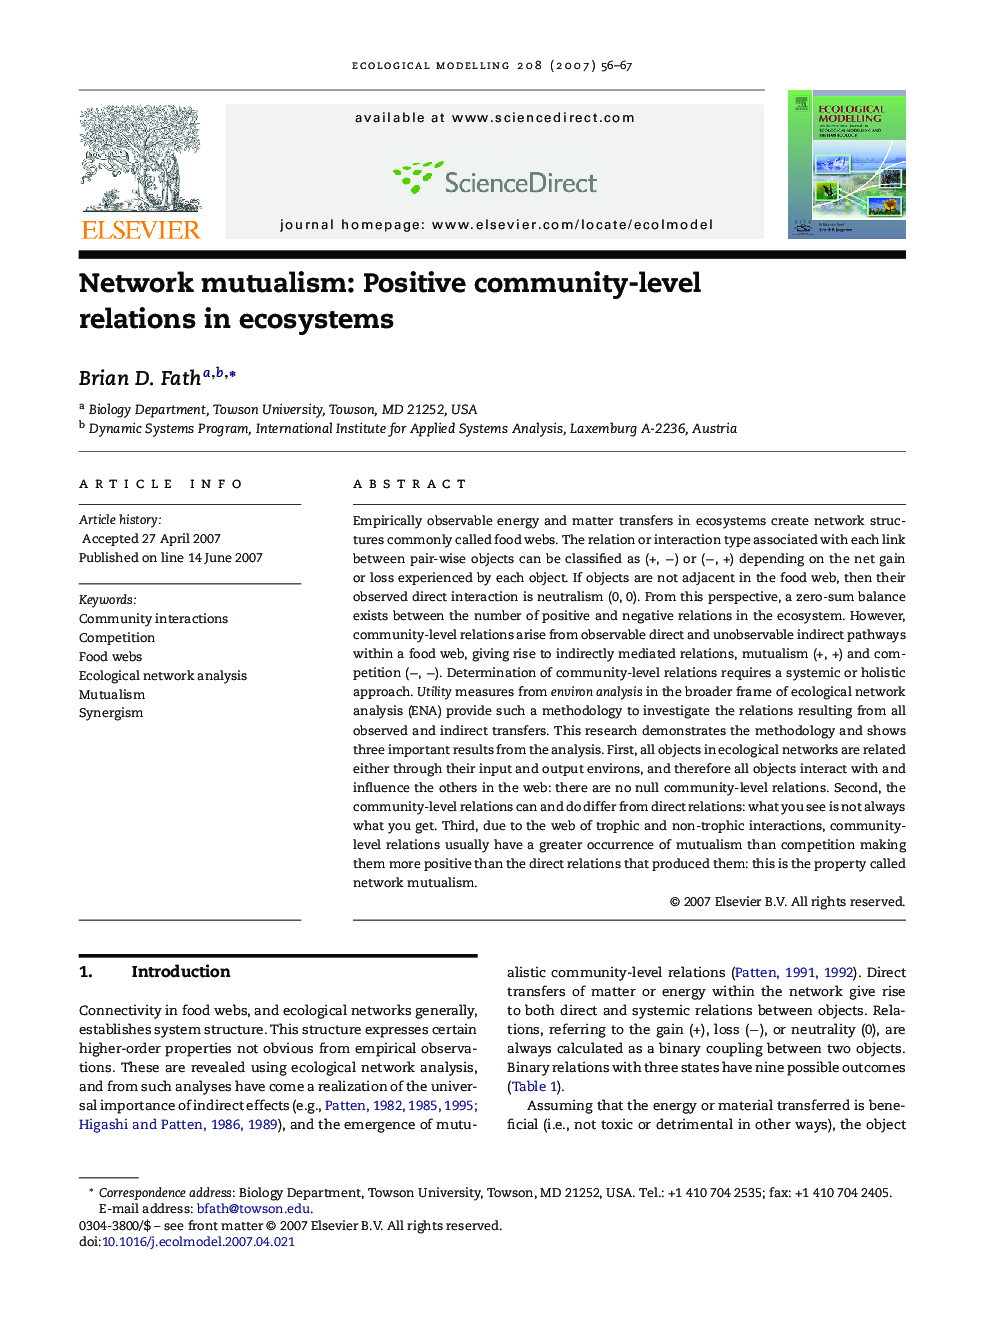 Network mutualism: Positive community-level relations in ecosystems